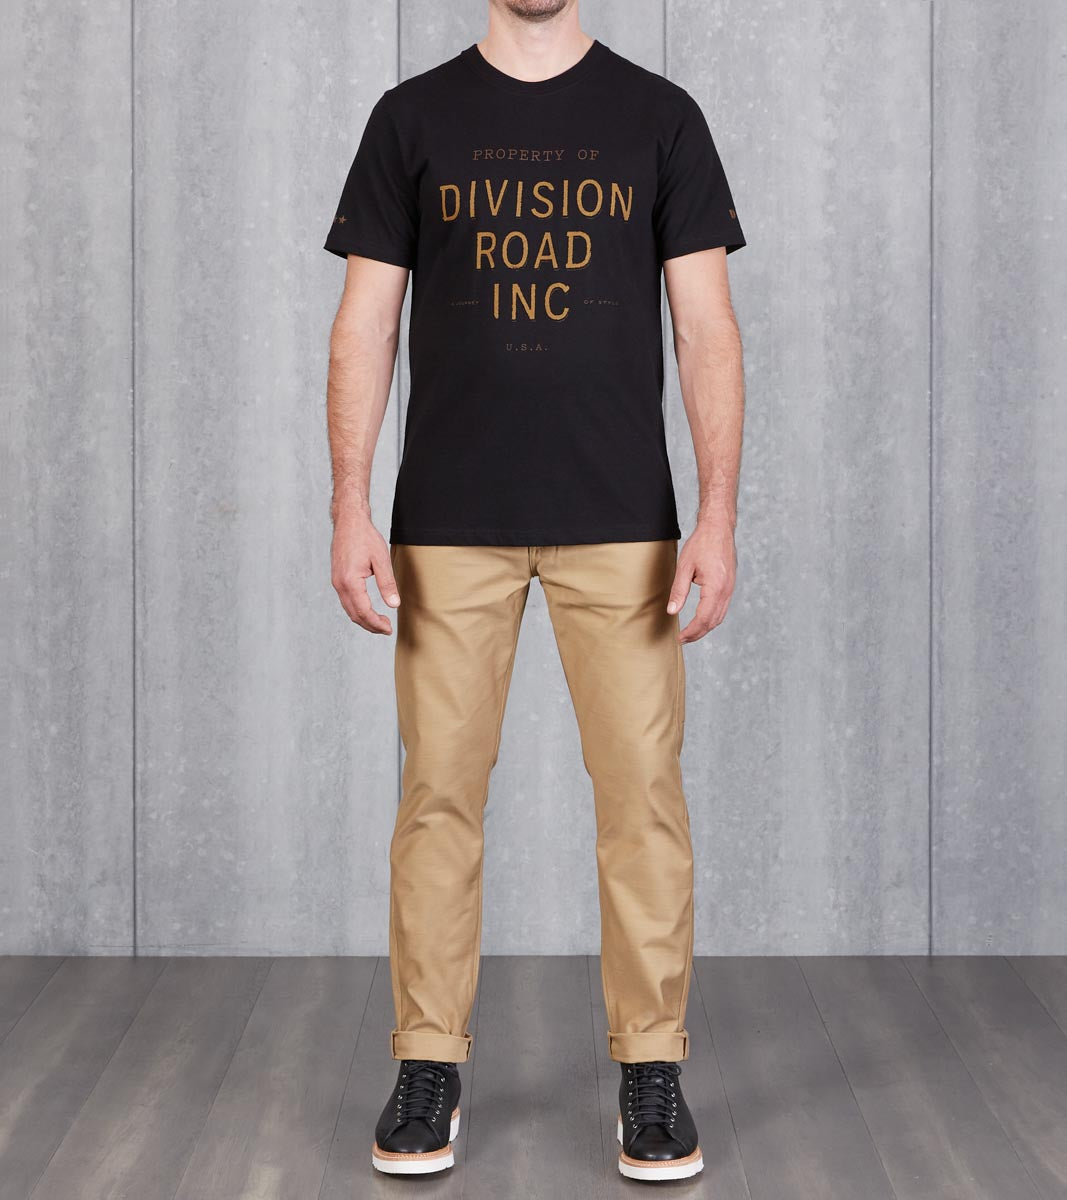 Division Road Provisions Army Heavyweight Short Sleeve Tee - Black –  Division Road, Inc.